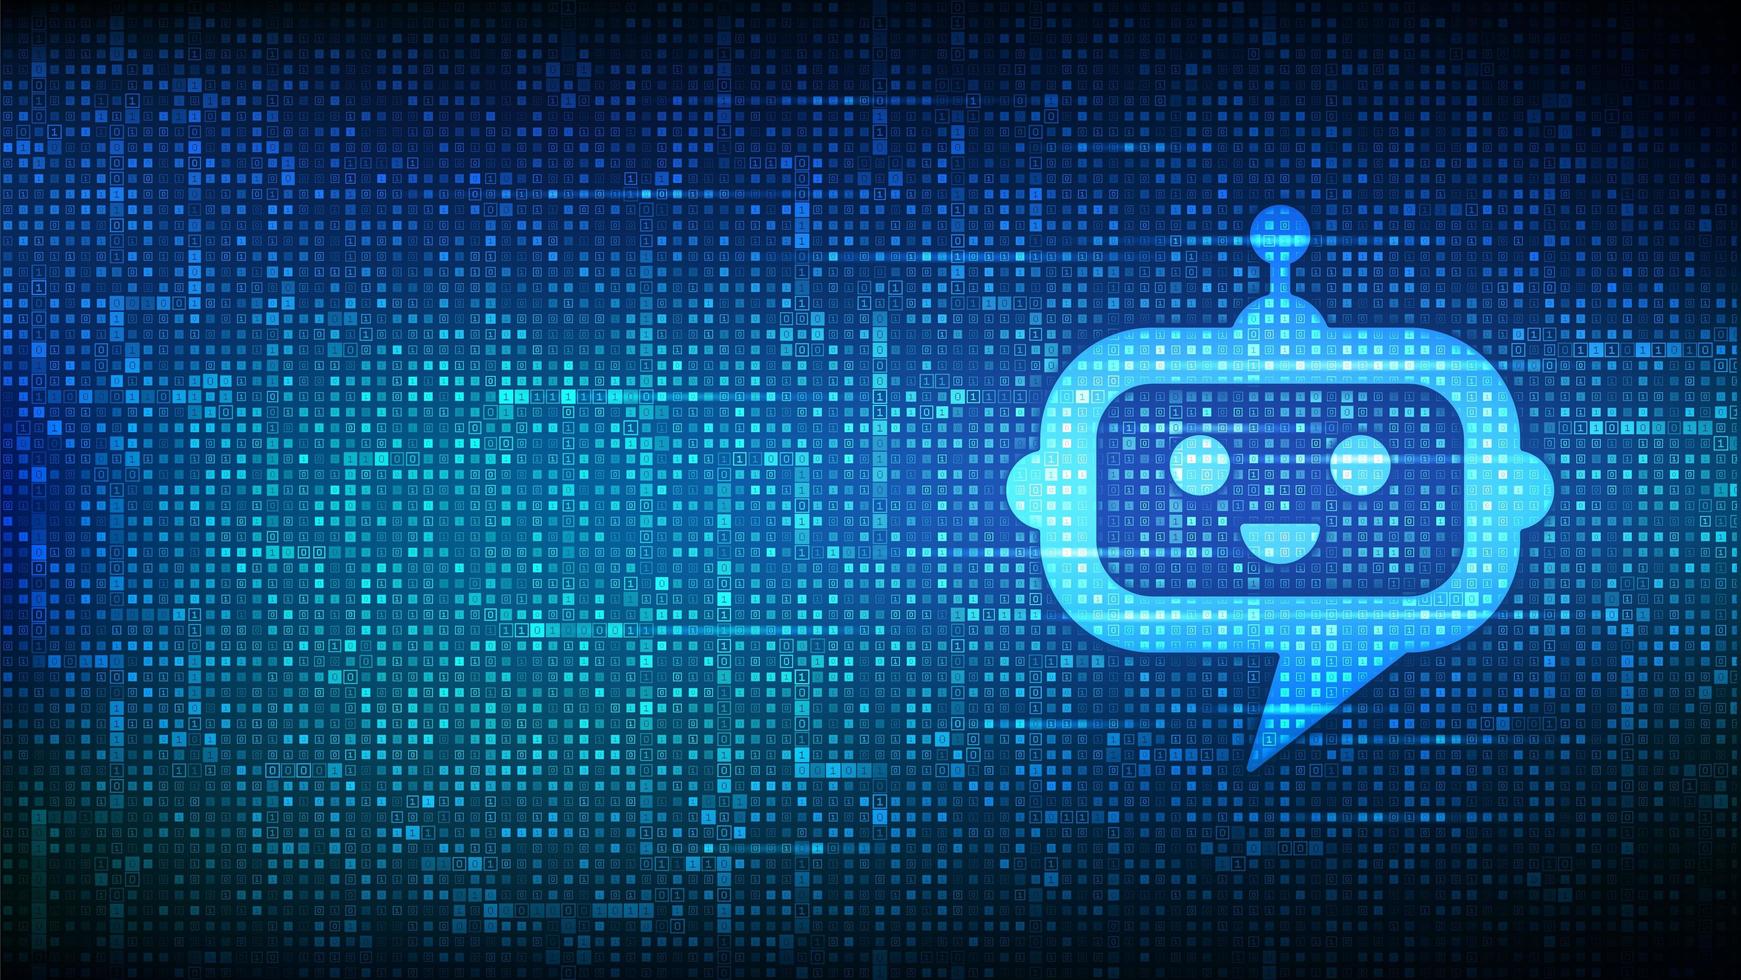 Robot chatbot head icon sign made with binary code. vector